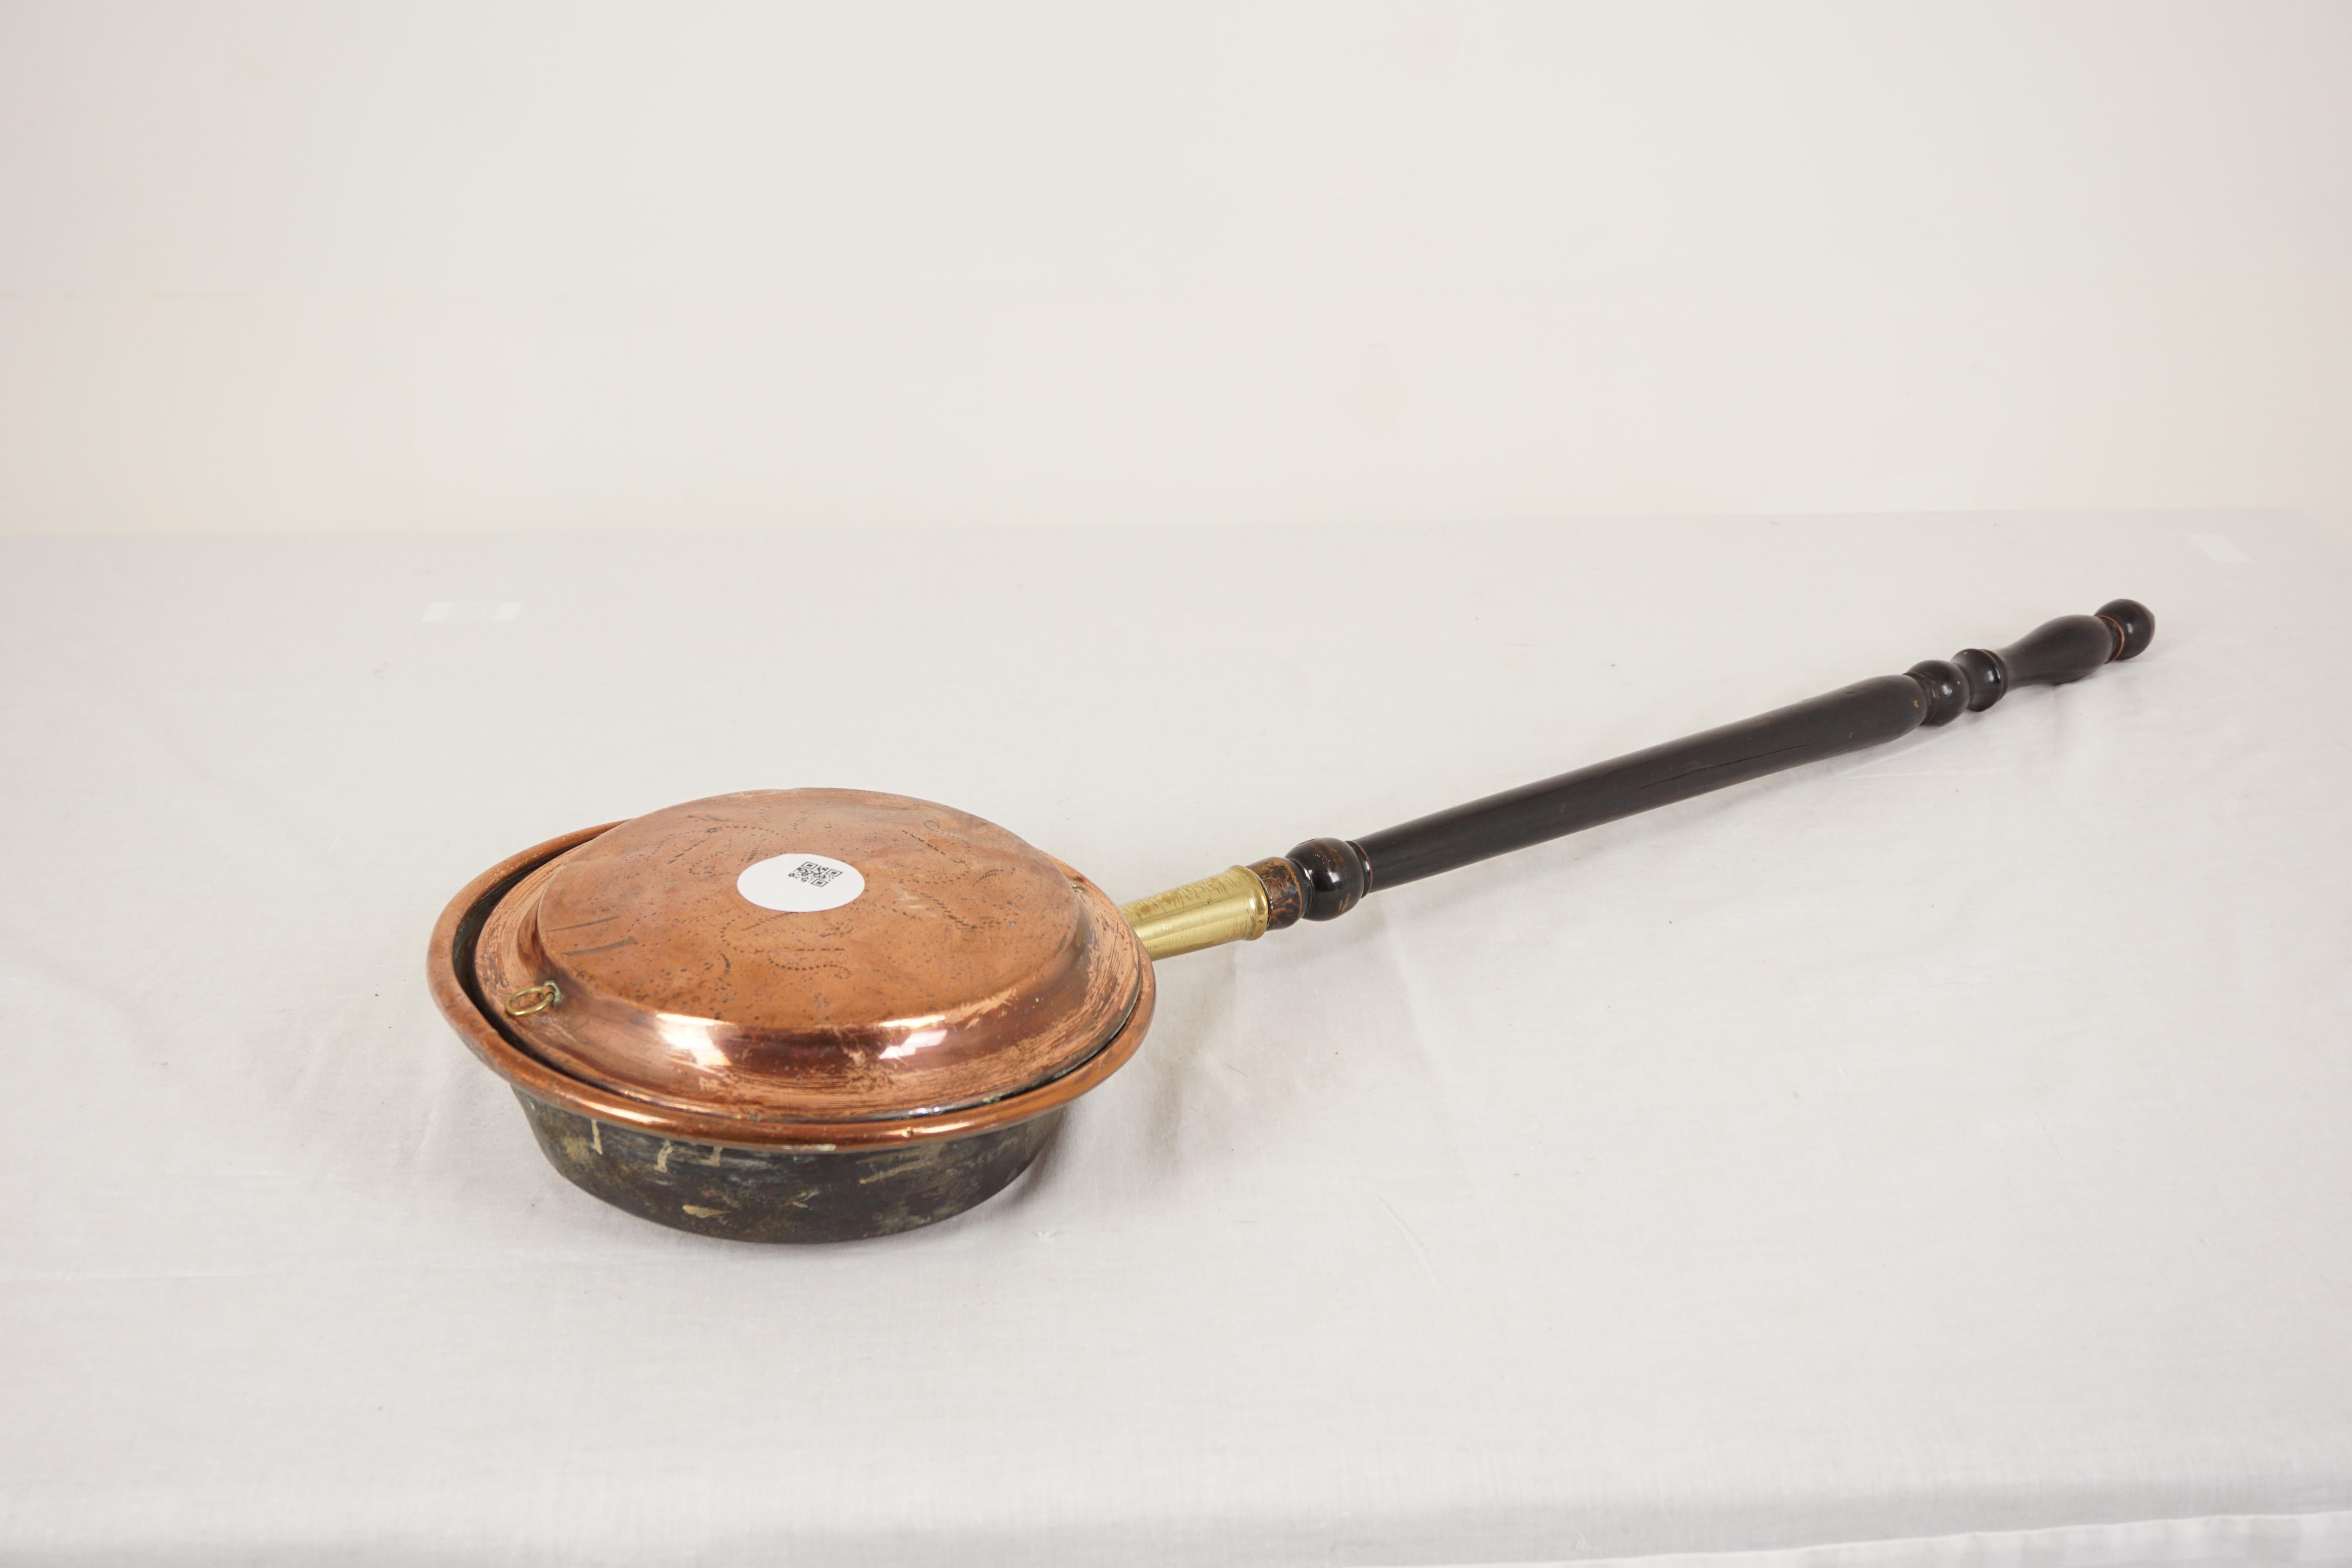 Antique victorian copper bed warmer, bed pan, Scotland 1880, H1088

Scotland 1880
Solid Copper
Original Finish
Turned wooden handle
Embossed top copper lid opens to reveal interior which will hold warms coals
These were used to warm the